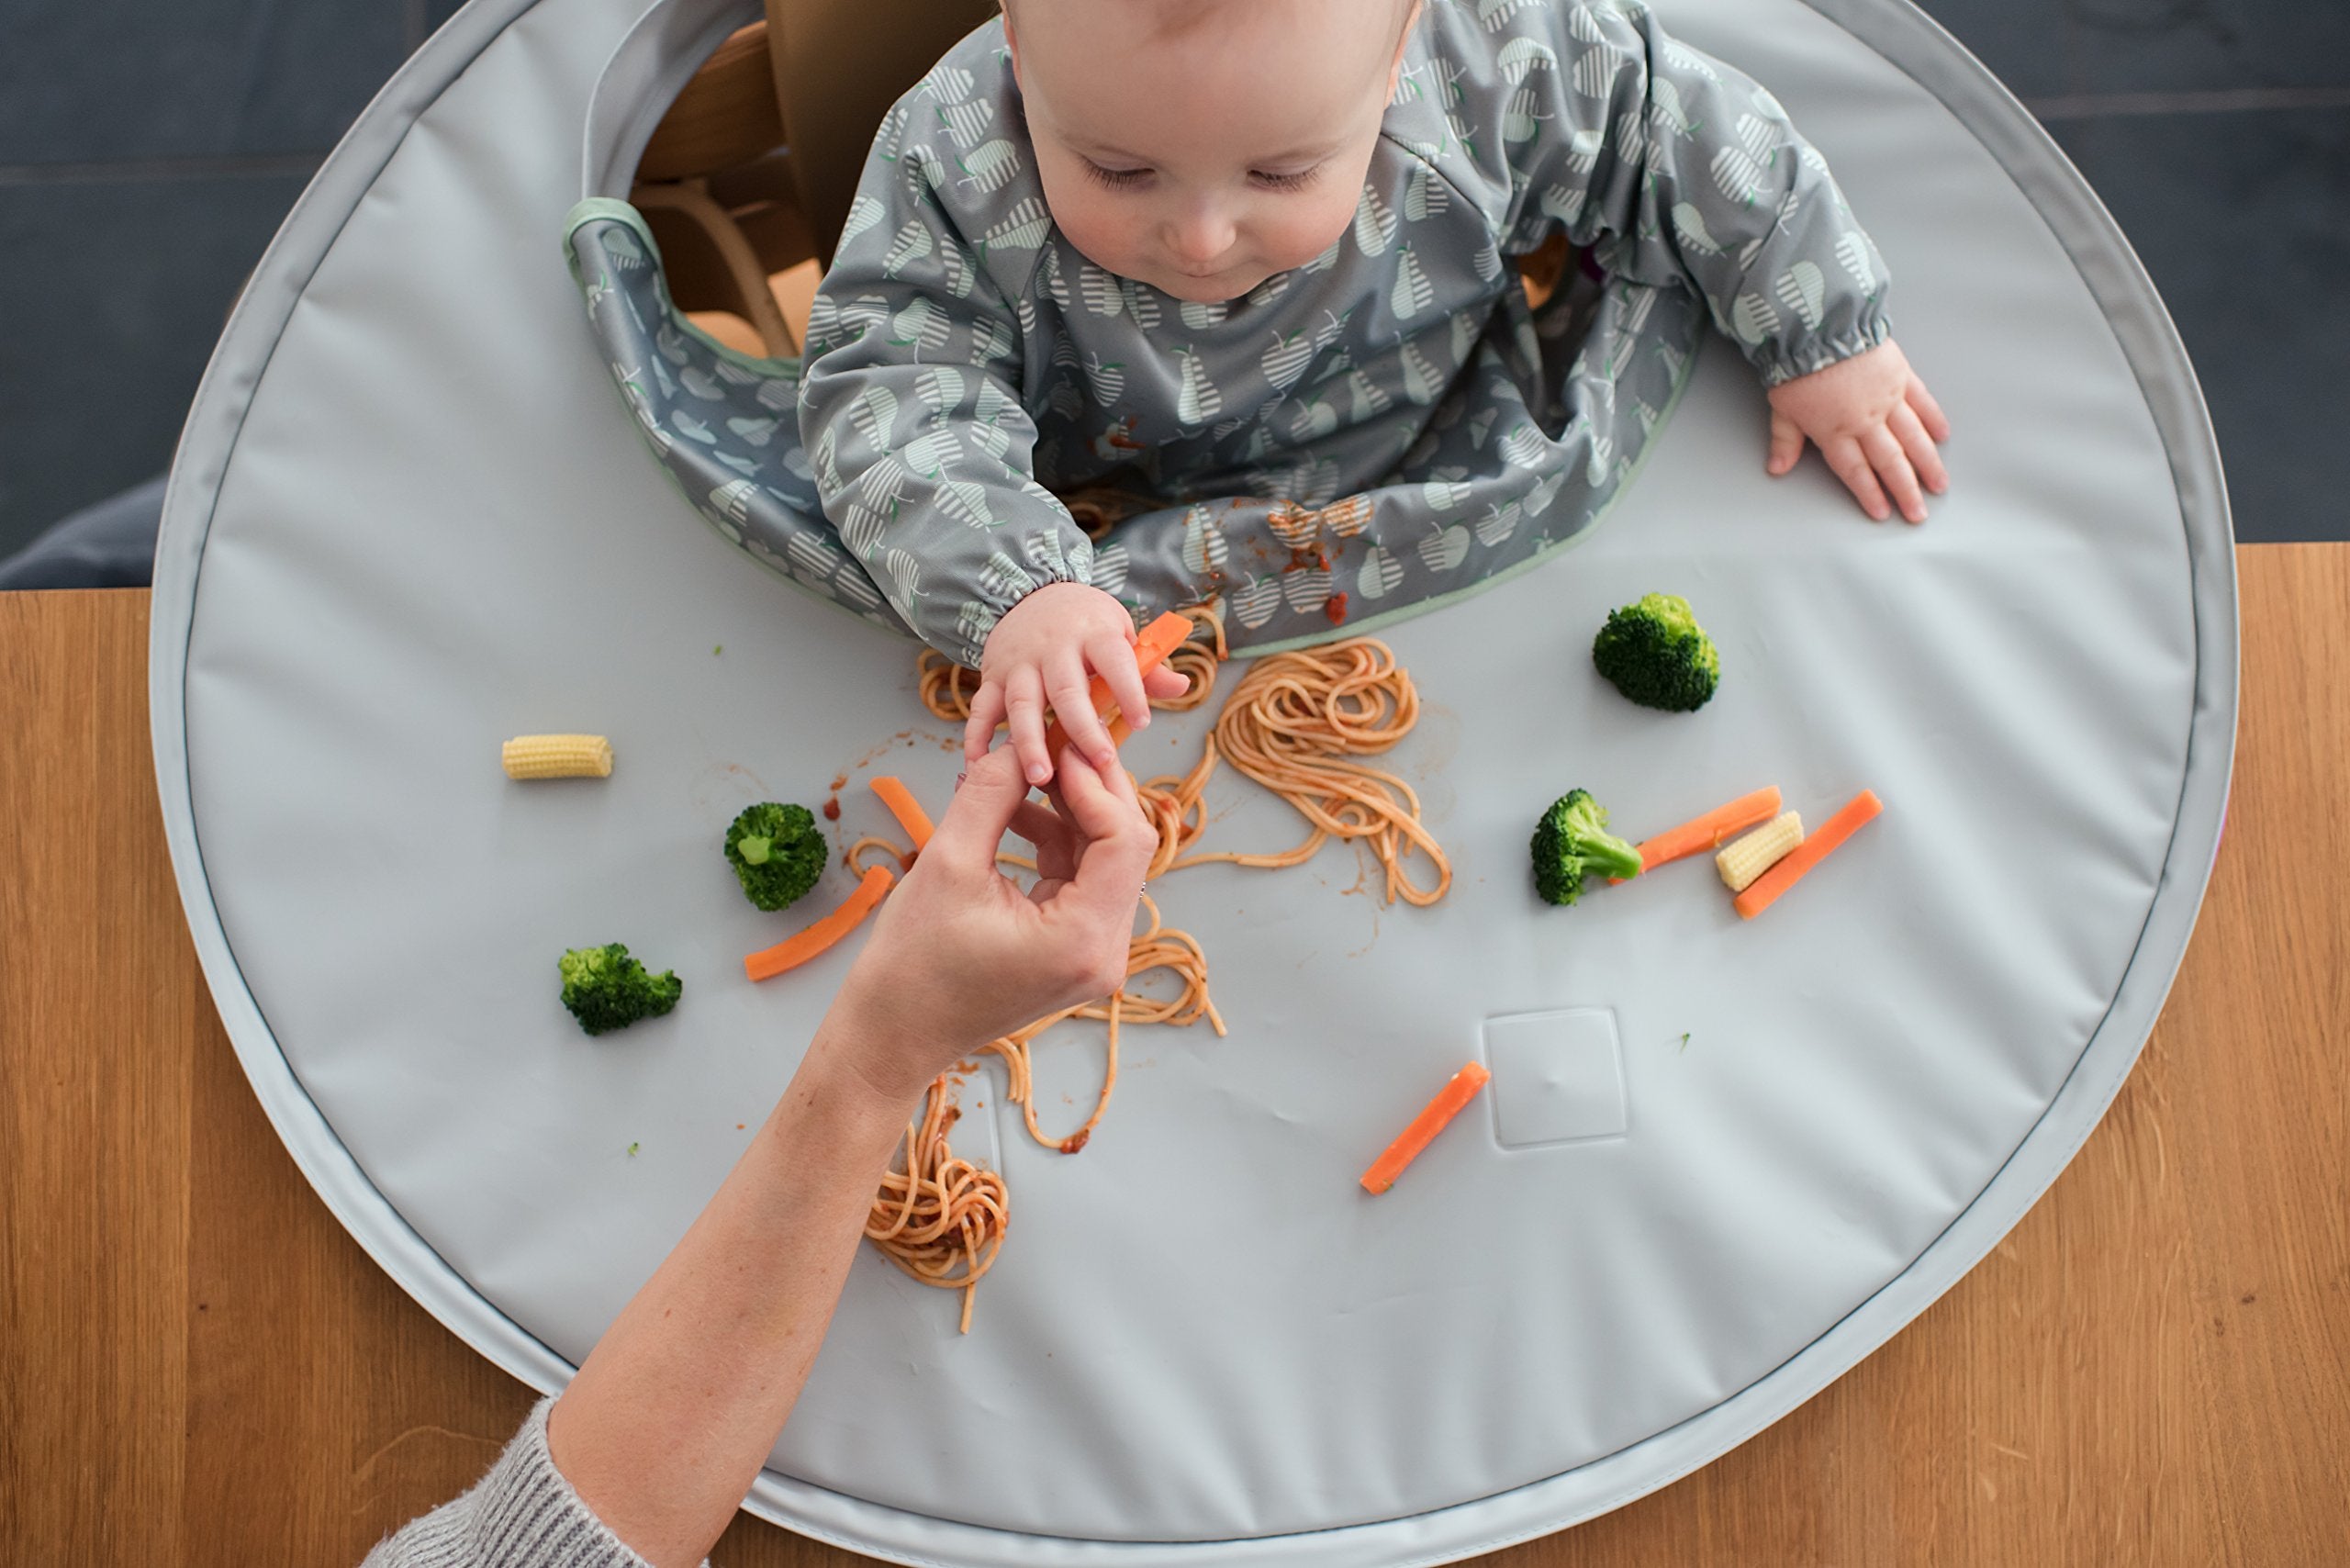 Tidy Tot Bib and Tray Kit Review - Mealtimes Without the Mess - A Mum  Reviews